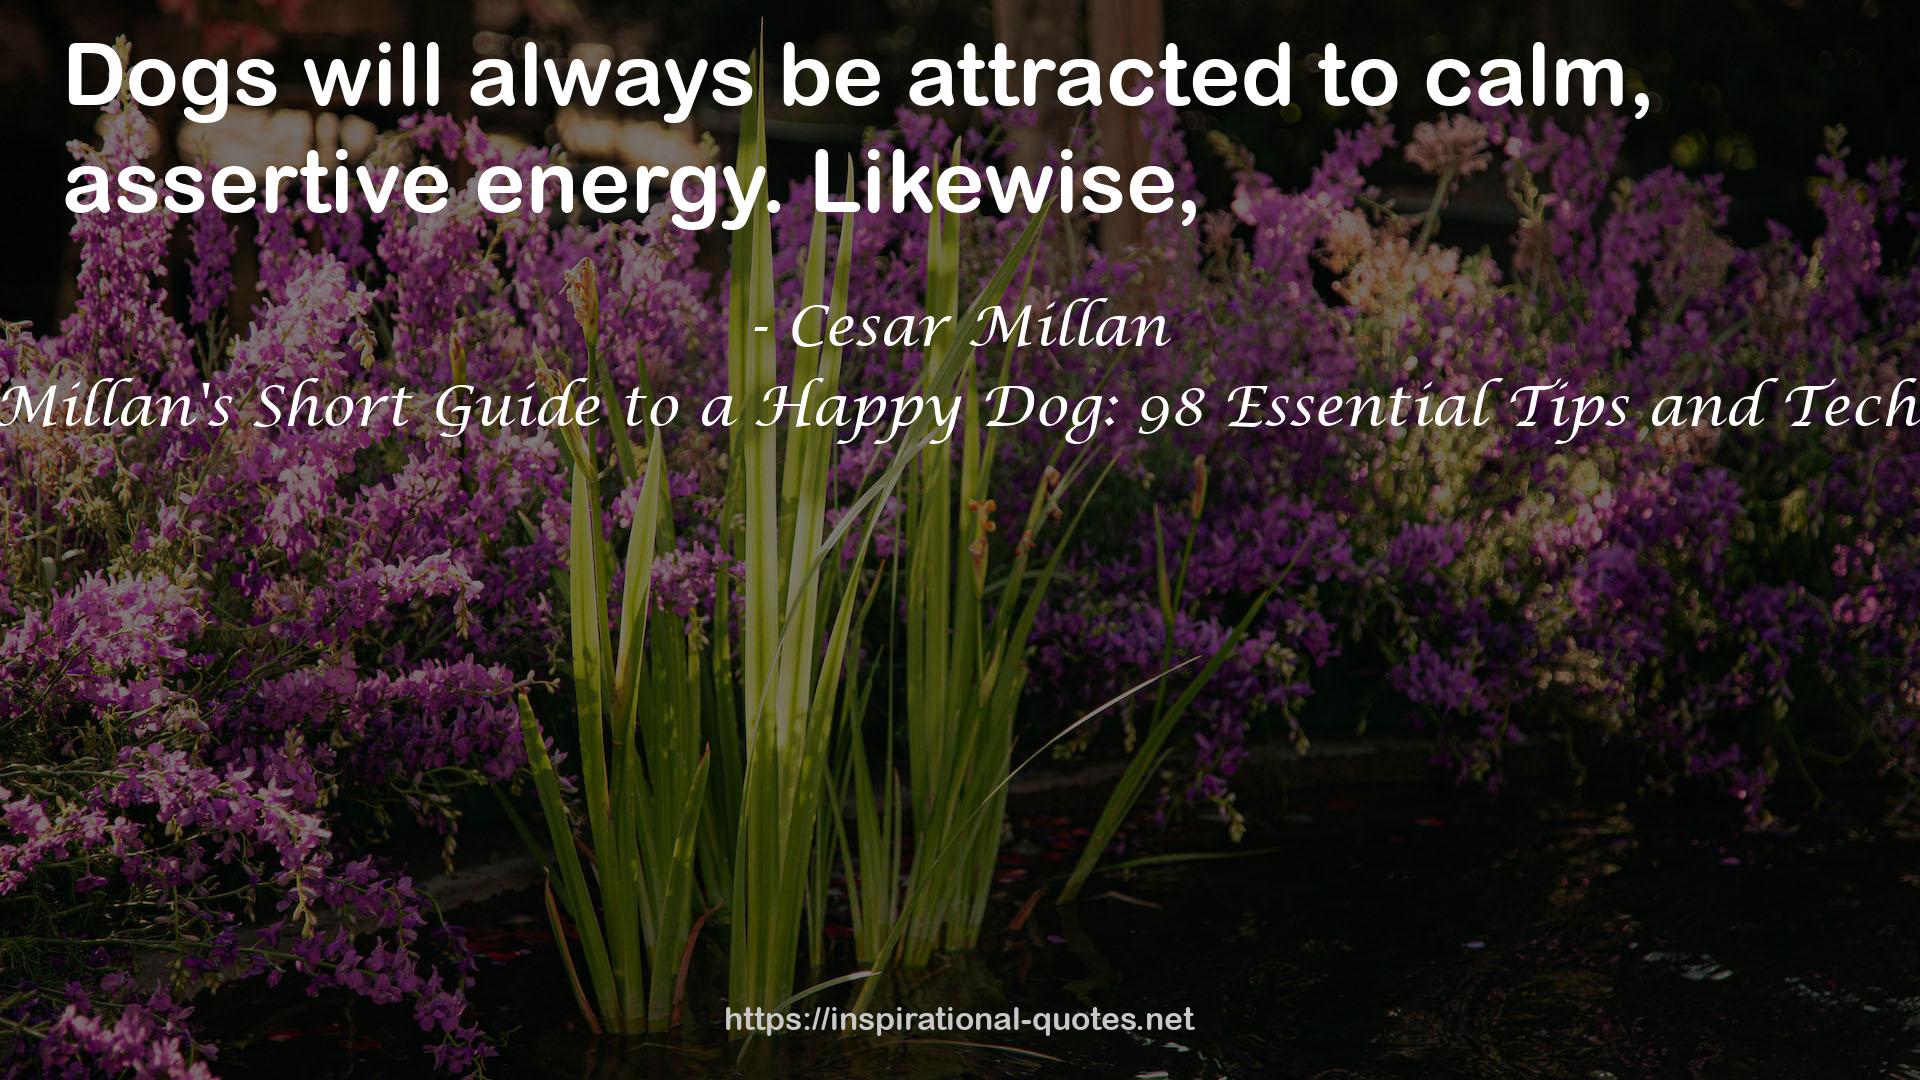 Cesar Millan's Short Guide to a Happy Dog: 98 Essential Tips and Techniques QUOTES